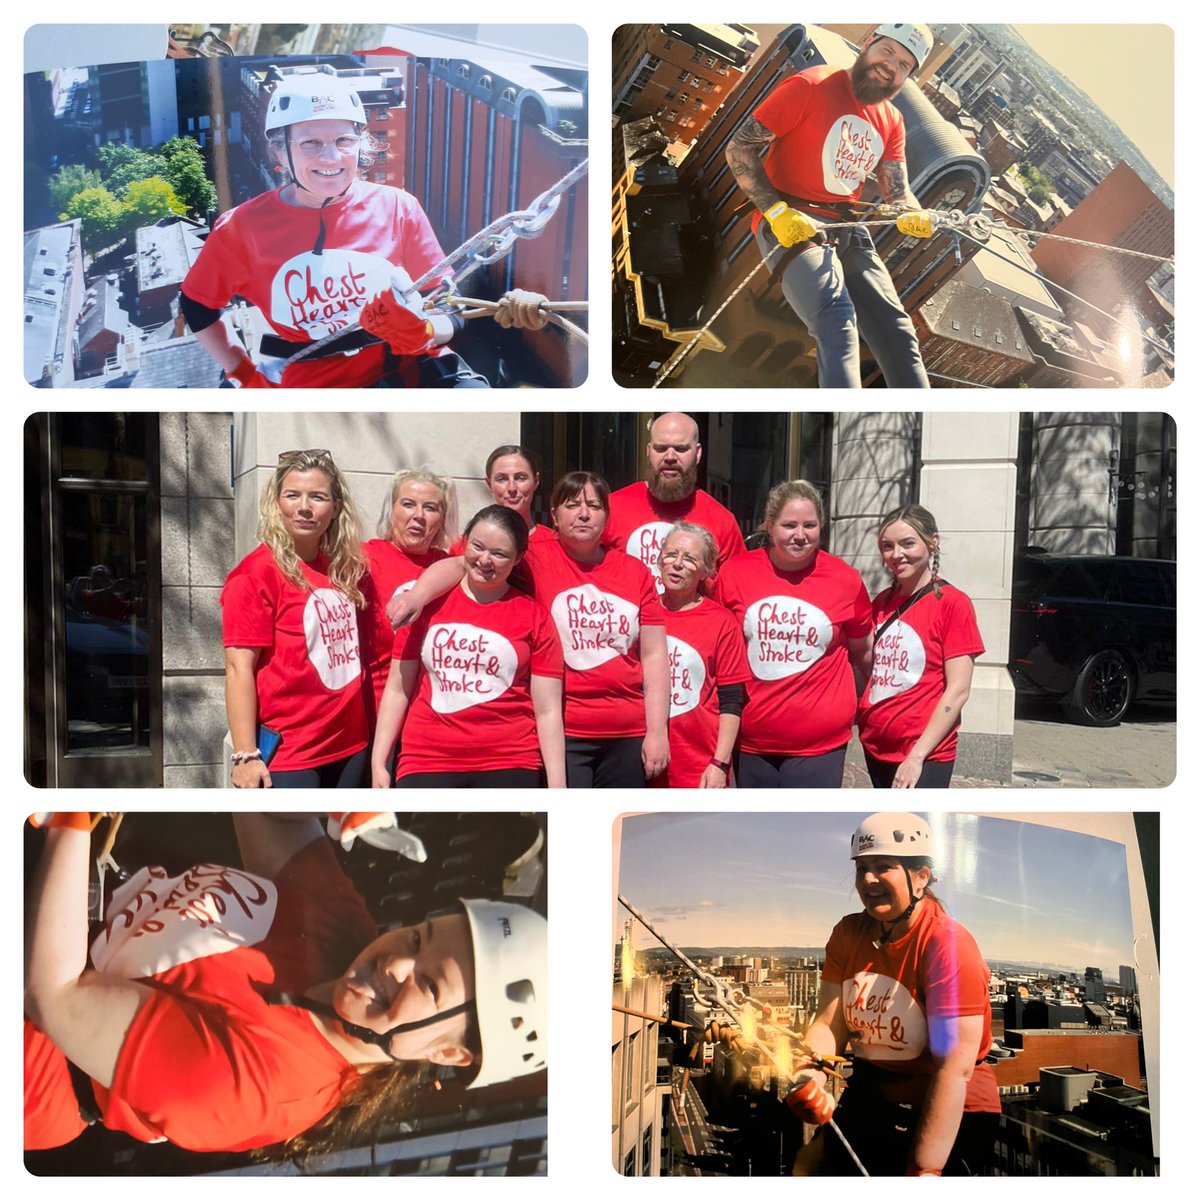 What a fantastic day we all had abseiling down the Europa hotel to raise funds for such an amazing charity @nichstweet thank you to EVERYONE that has donated already, it is really appreciated #TeamNorth #TeamA6 #A6StrokeUnit